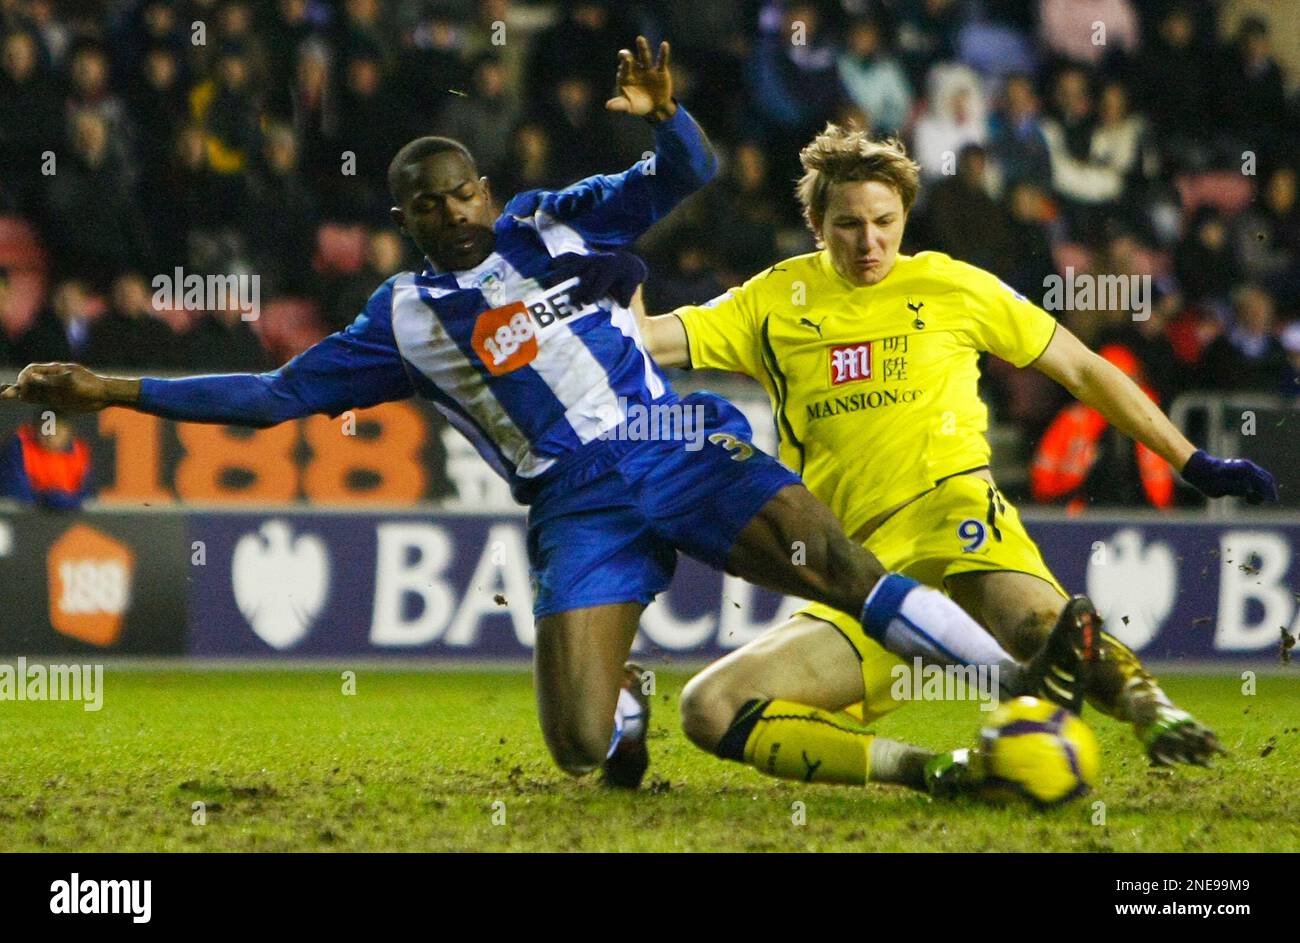 Tottenham Hotspur's Roman Pavlyuchenko, right, beats the tackle of Wigan  Athletic's Maynor Figueroa to score a goal during their English Premier  League soccer match at DW Stadium, Wigan, England, Sunday Feb. 21